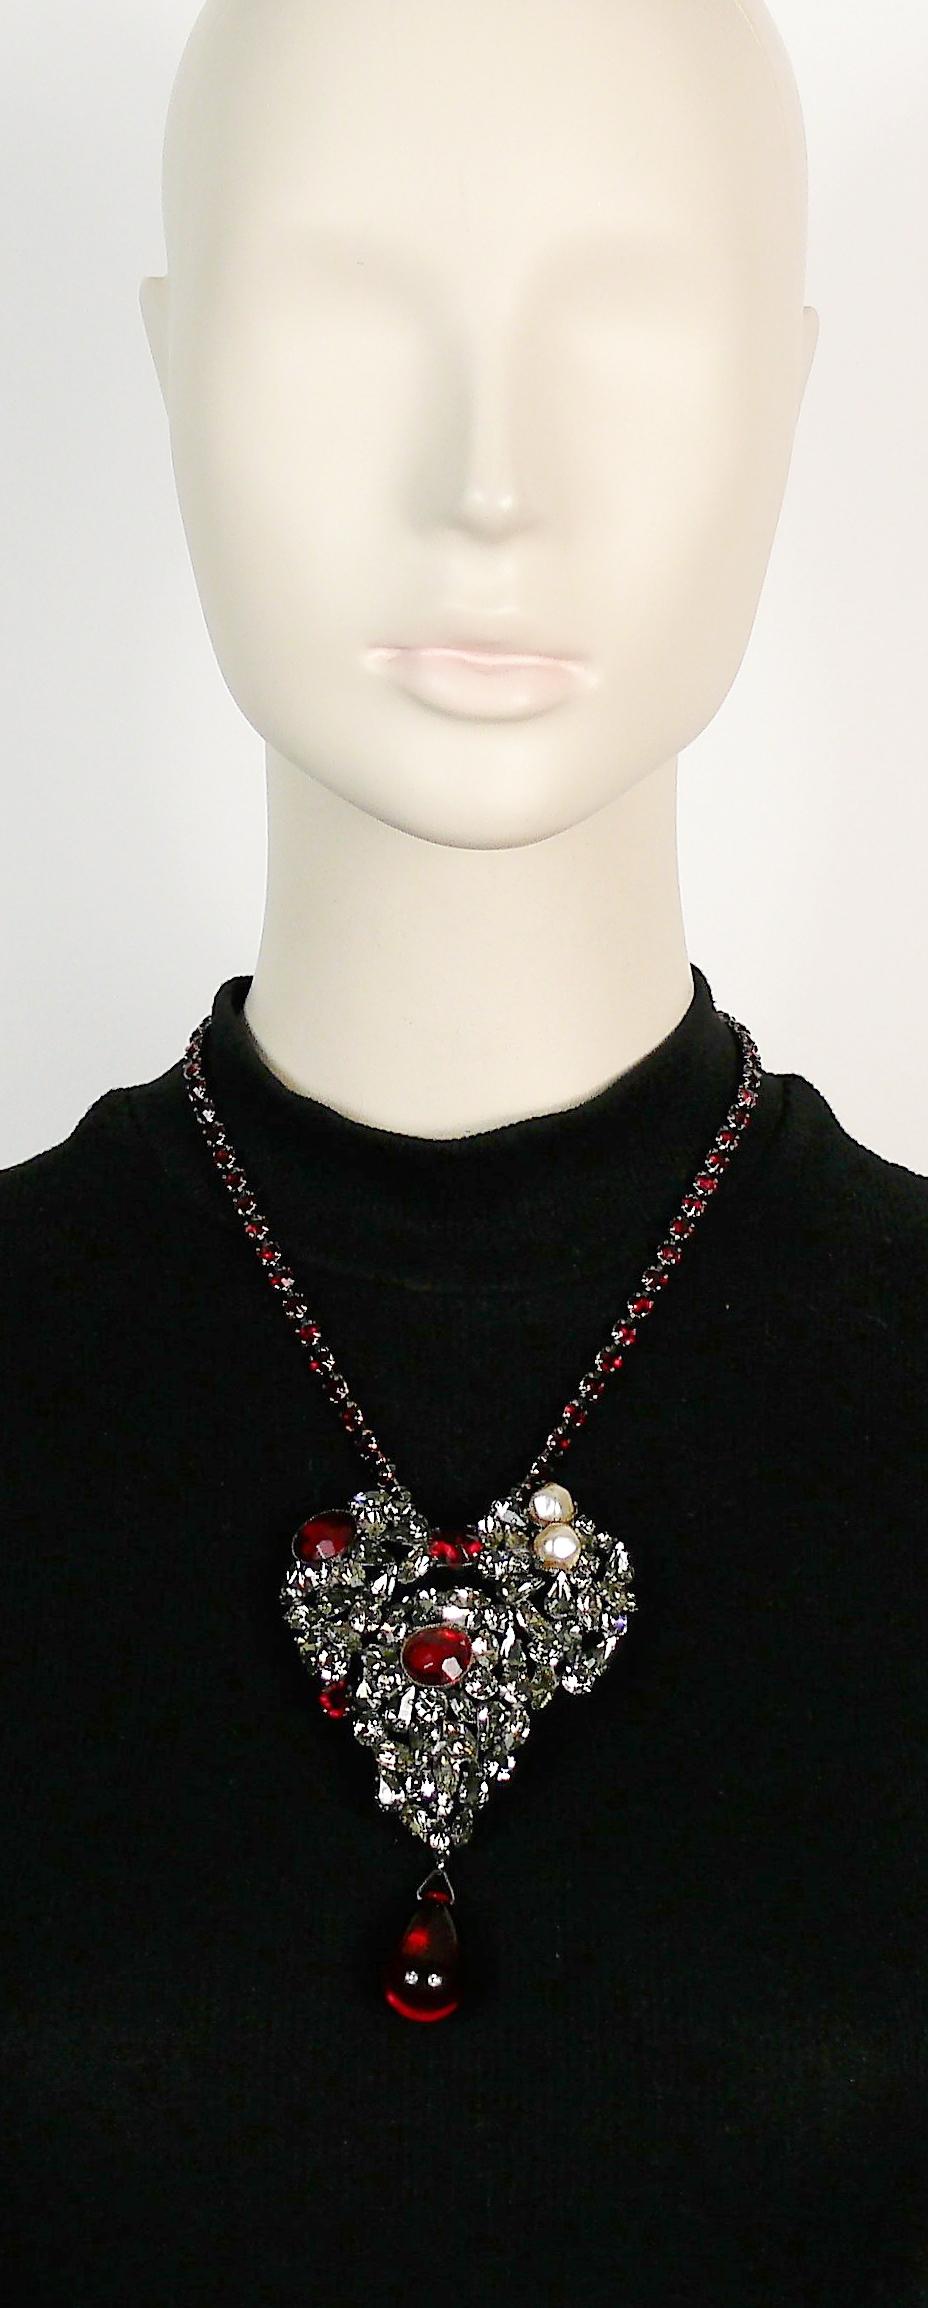 YVES SAINT LAURENT Haute Couture iconic necklace featuring a bejeweled heart embellished with faux diamonds, rubies and pearls with ruby rhinestone chain.

The heart can be worn as a brooch.

Hook clasp closure.
Adjustable length.

Embossed YSL